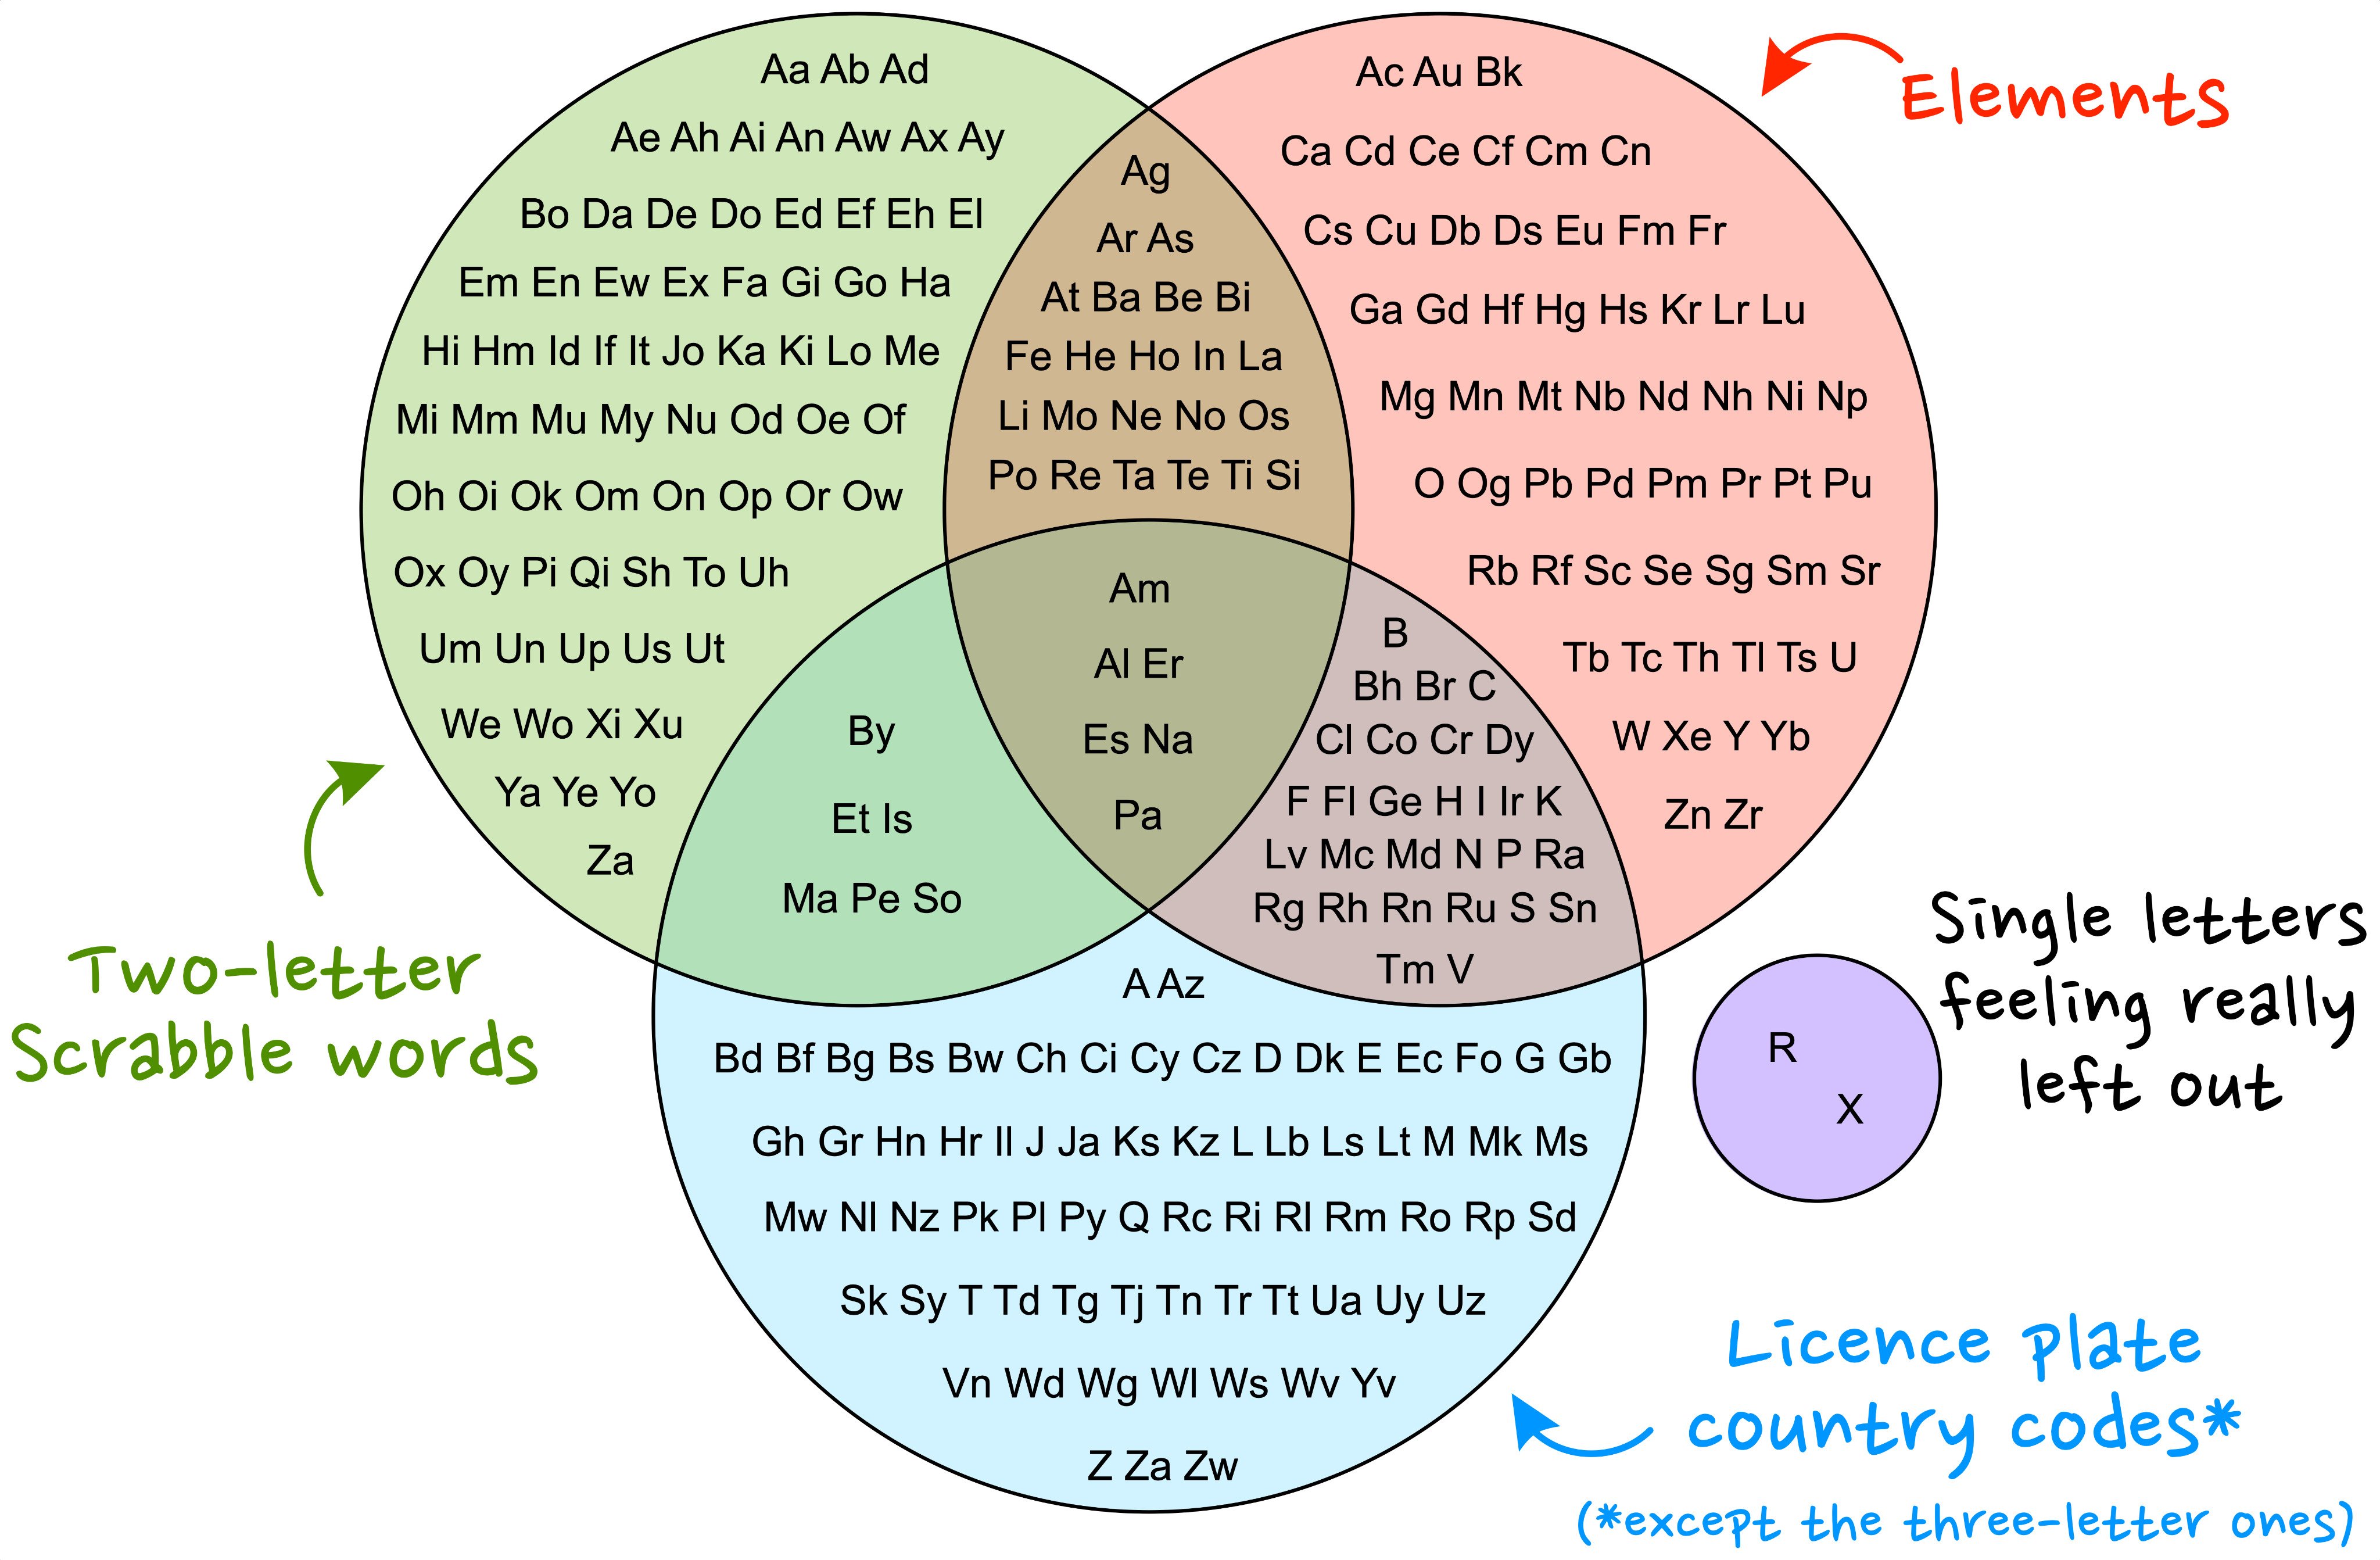 udvide Altid Økologi Stuart Cantrill on Twitter: "For all you element/Scrabble/car/Venn-diagram  enthusiasts. Yes, all three of you. (Might come in handy for quiz  questions, you never know...) #IYPT2019 https://t.co/63dprHP6OI" / Twitter